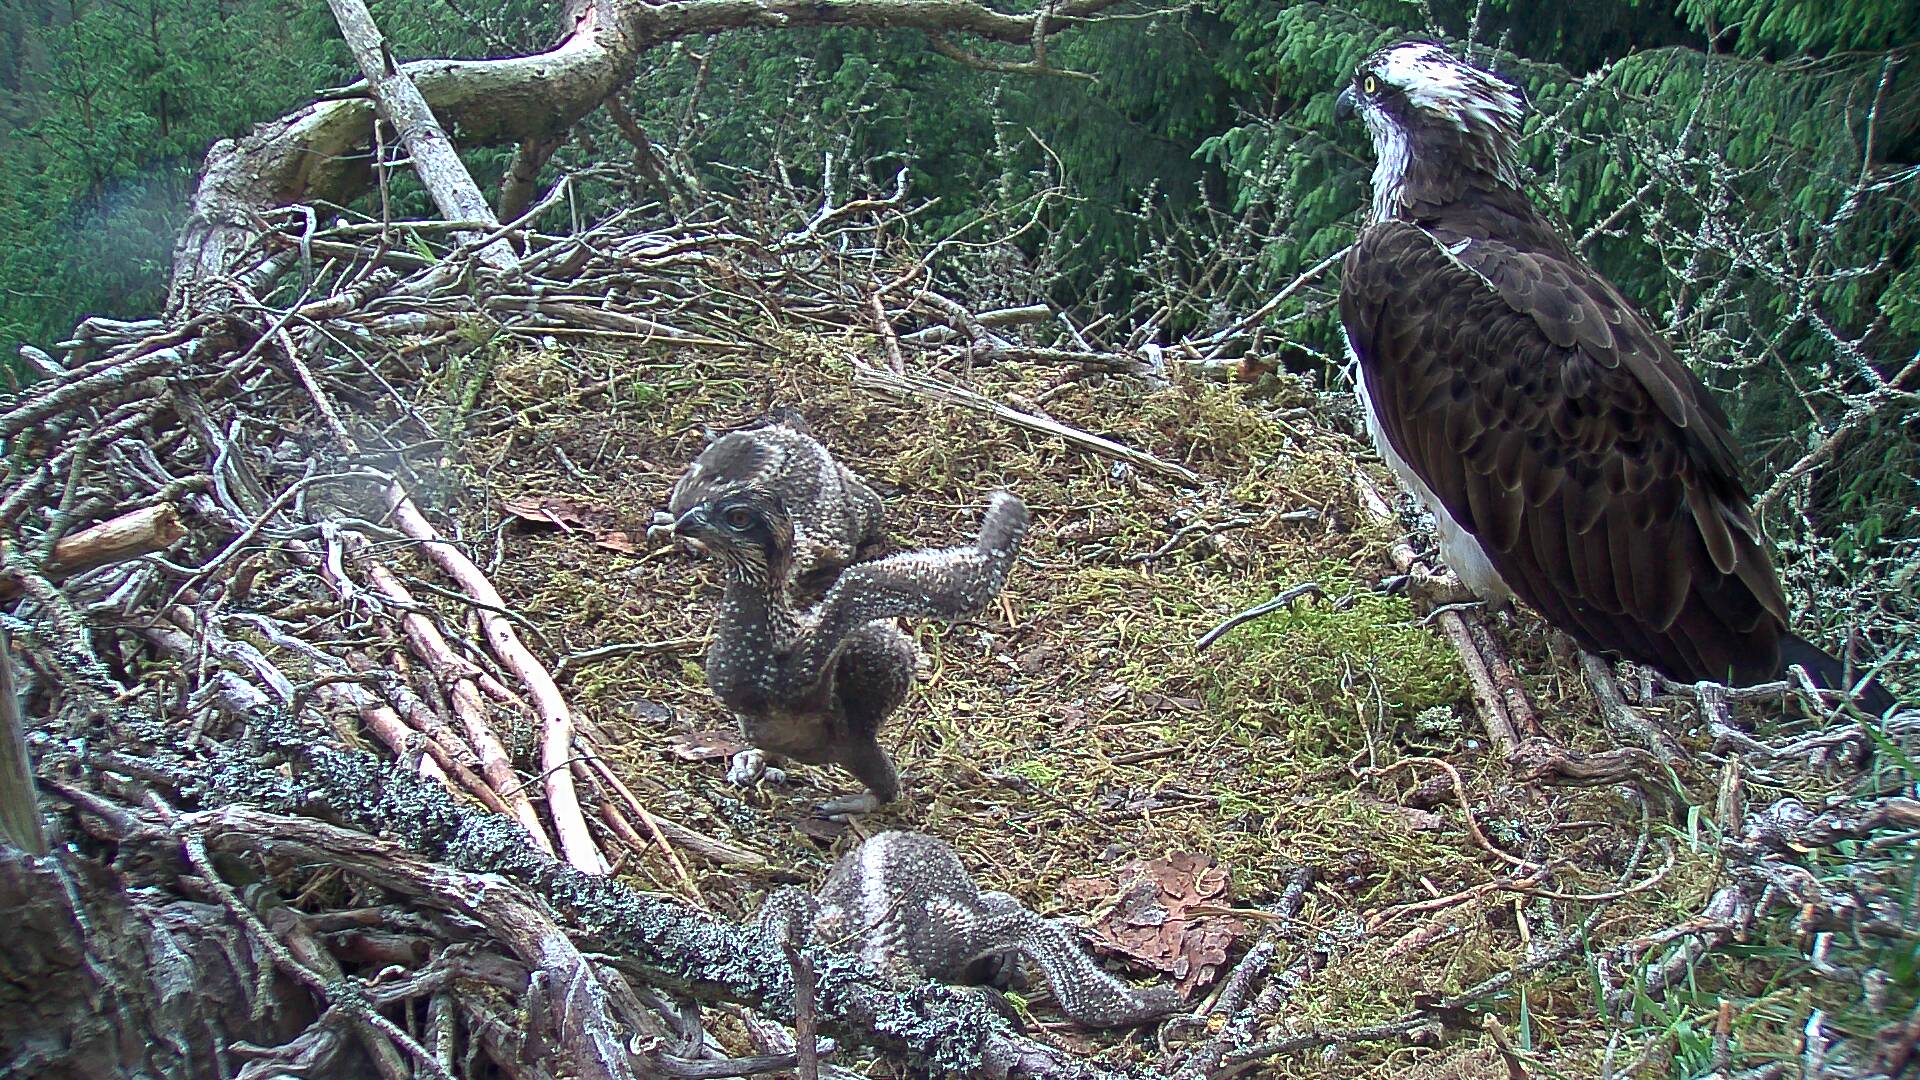 Young osprey chick hopping about in nest